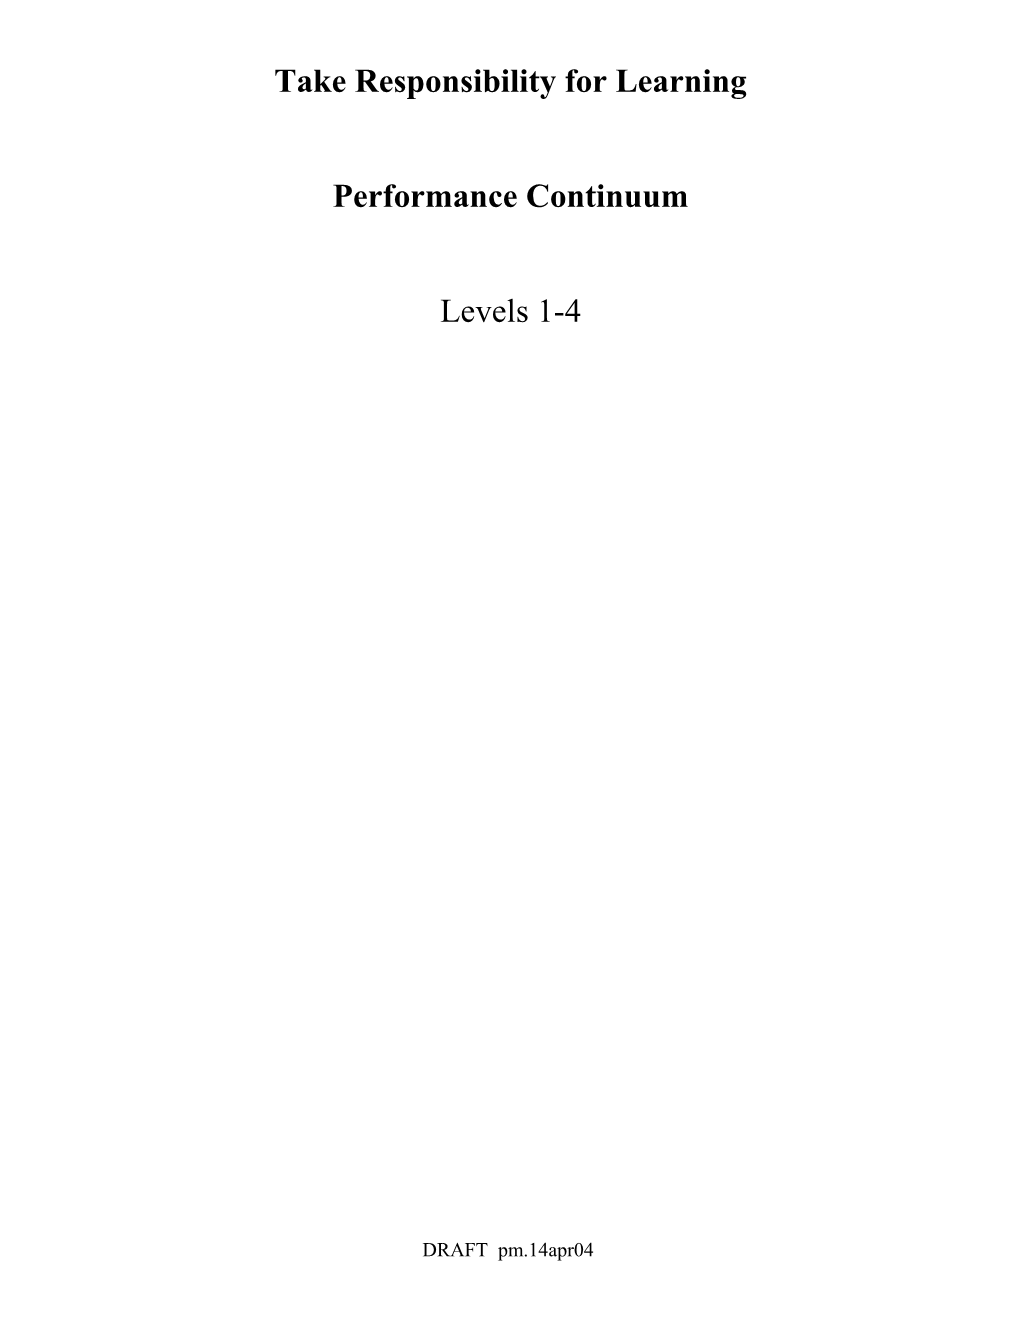 Read with Understanding PERFORMANCE LEVEL 1